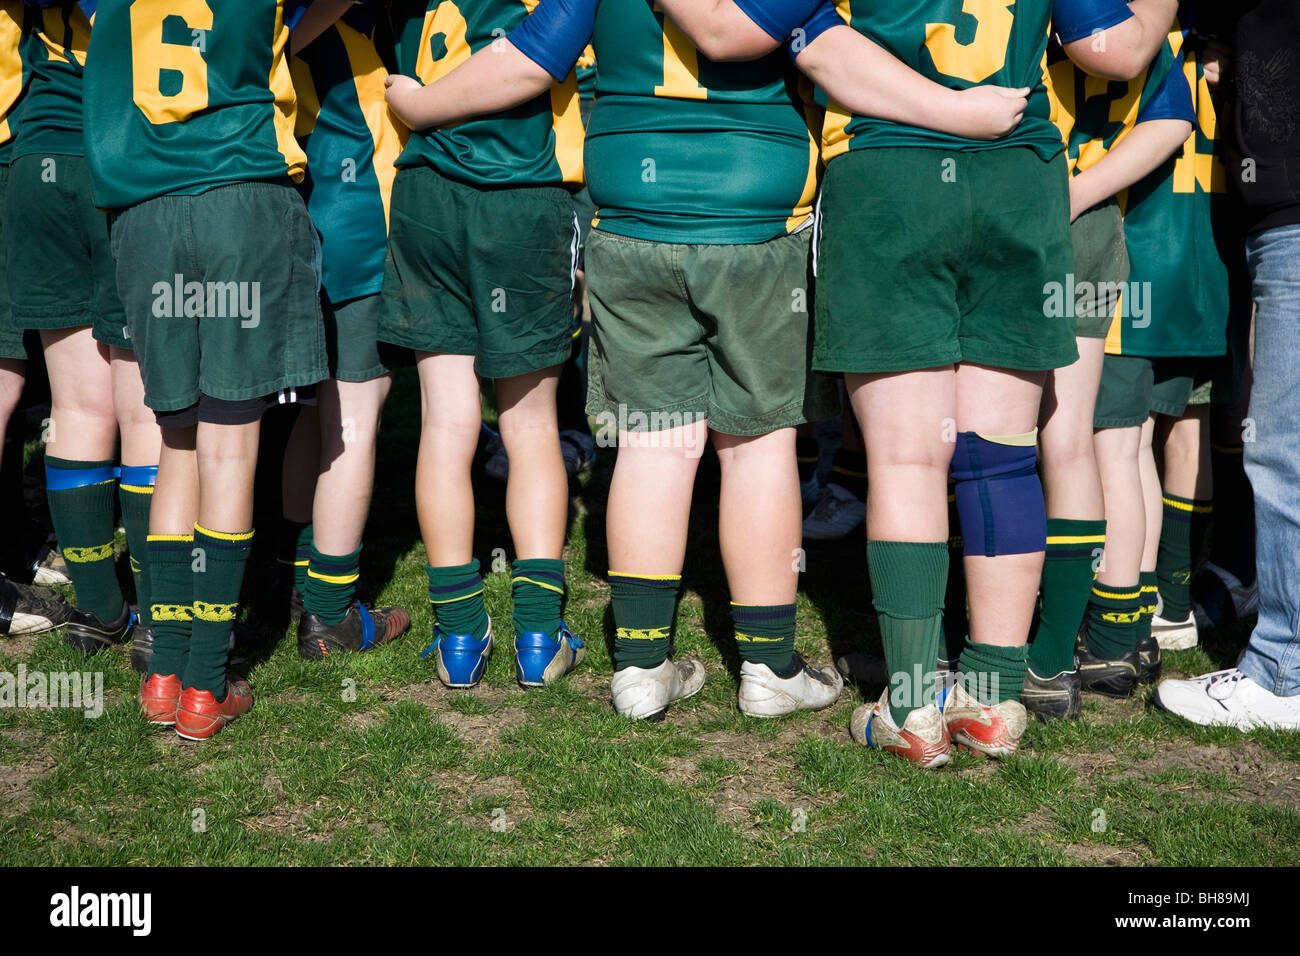 Rear view of a football team huddled together Stock Photo